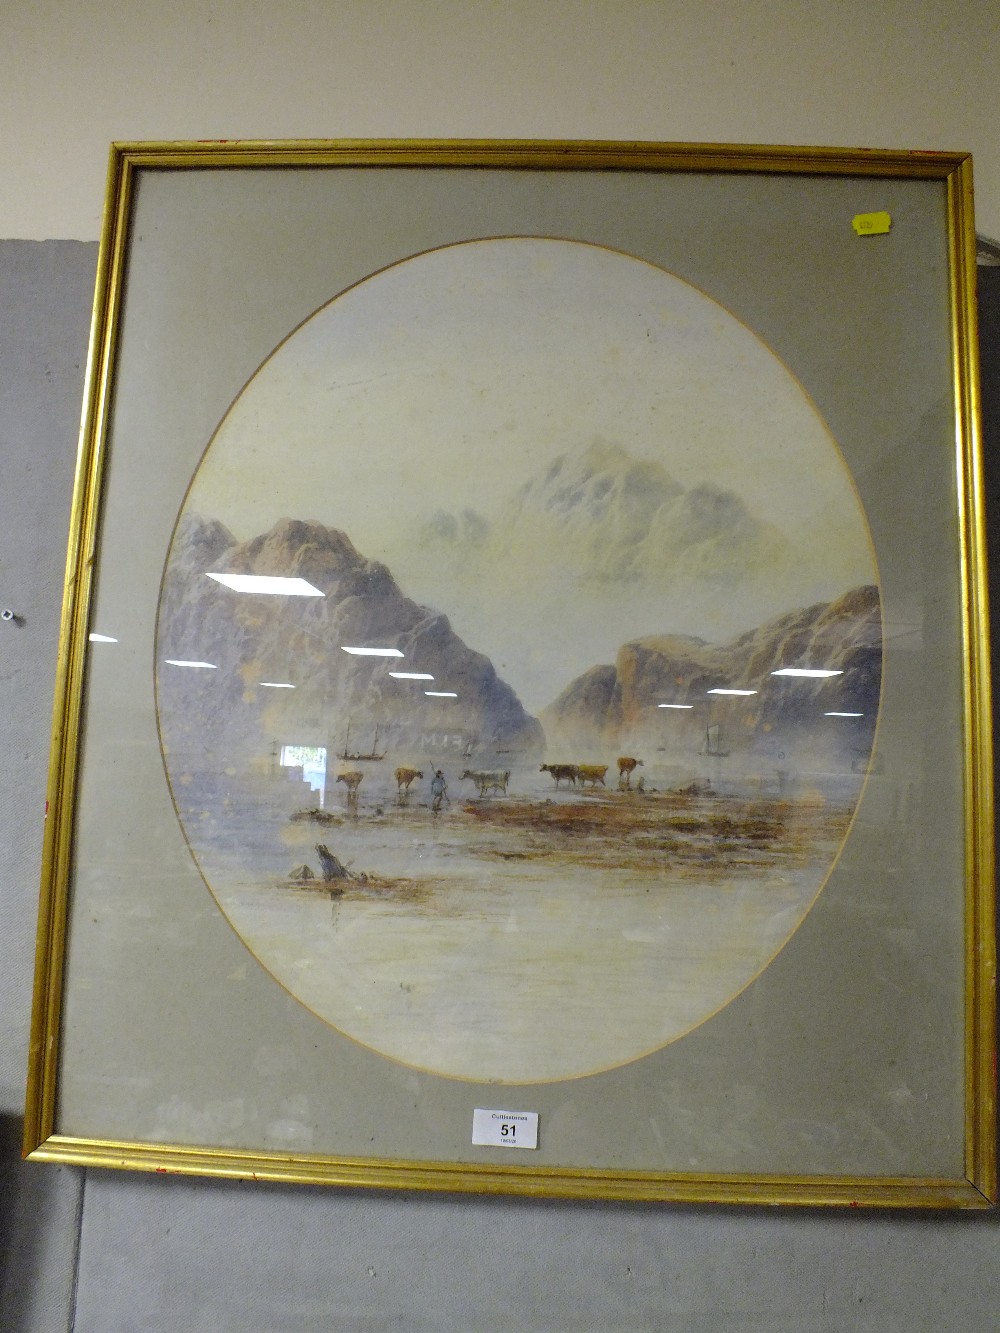 E.L. HERRING - A FRAMED AND GLAZED WATERCOLOUR DEPICTING A FIGURE WITH CATTLE IN A MOUNTAINOUS - Image 2 of 2